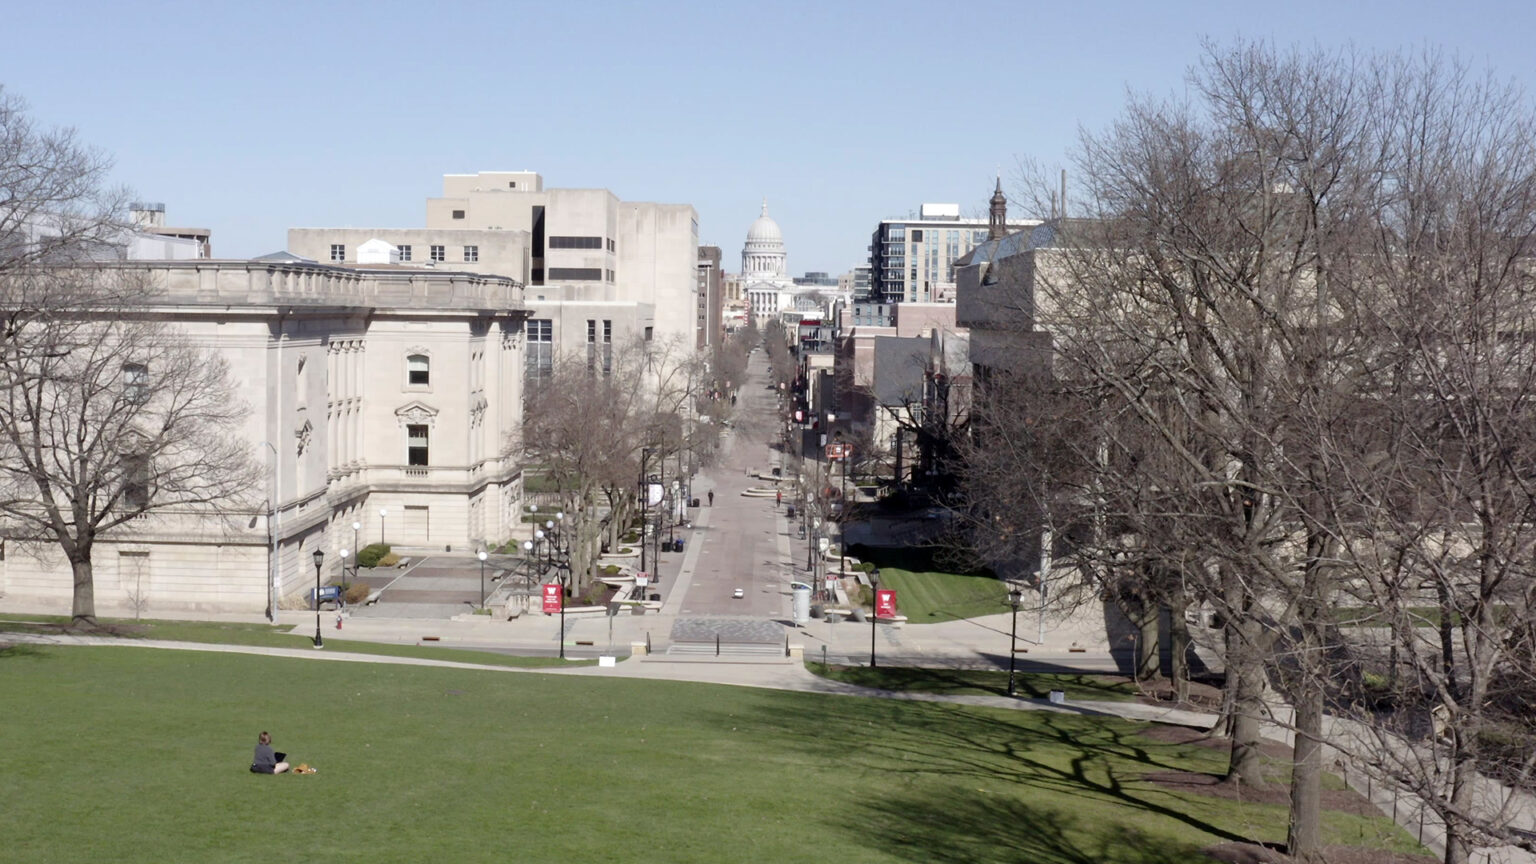 An aerial photo shows areas of grassy lawn at the bottom of a hill, with masonry and concrete buildings on either side of a street leading to the dome of the Wisconsin State Capitol, with leafless trees on both sides.